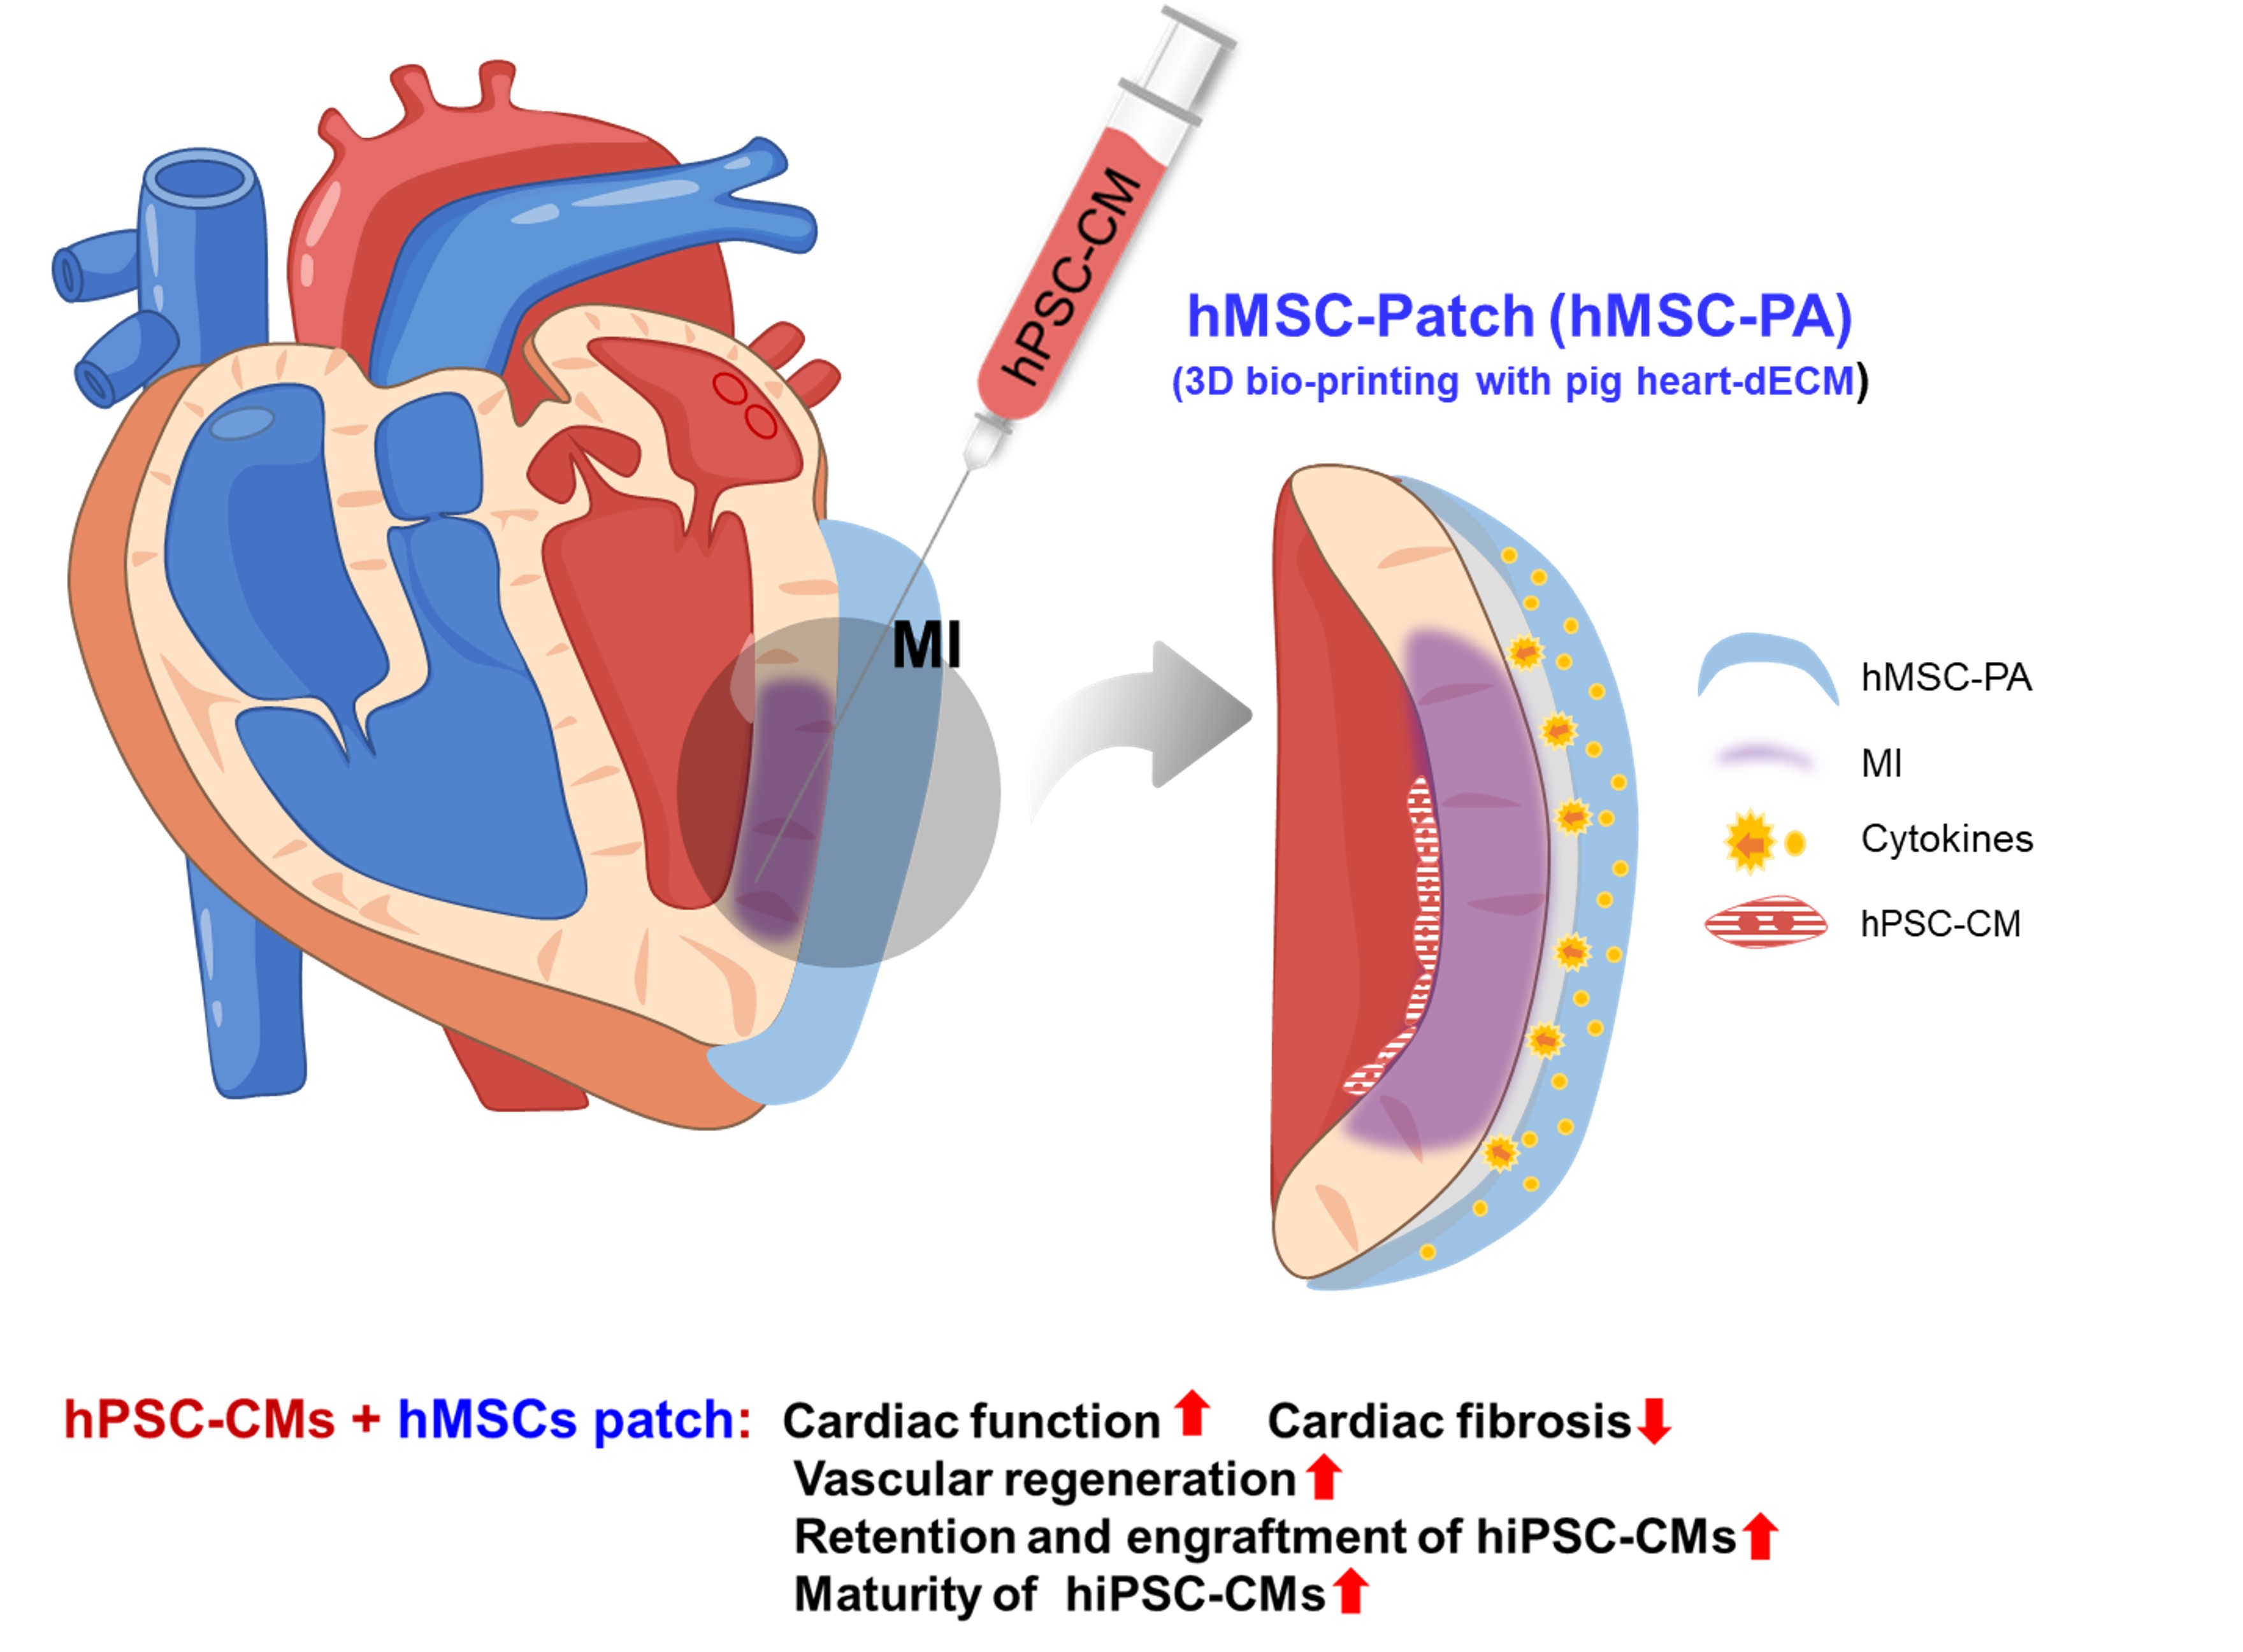 Schematic diagram of the underlying mechanism of dual treatment approach of hiPSC-CMs and hMSC-patch. (Photo source: Nature Communications, https://www.nature.com/articles/s41467-019-11091-2)